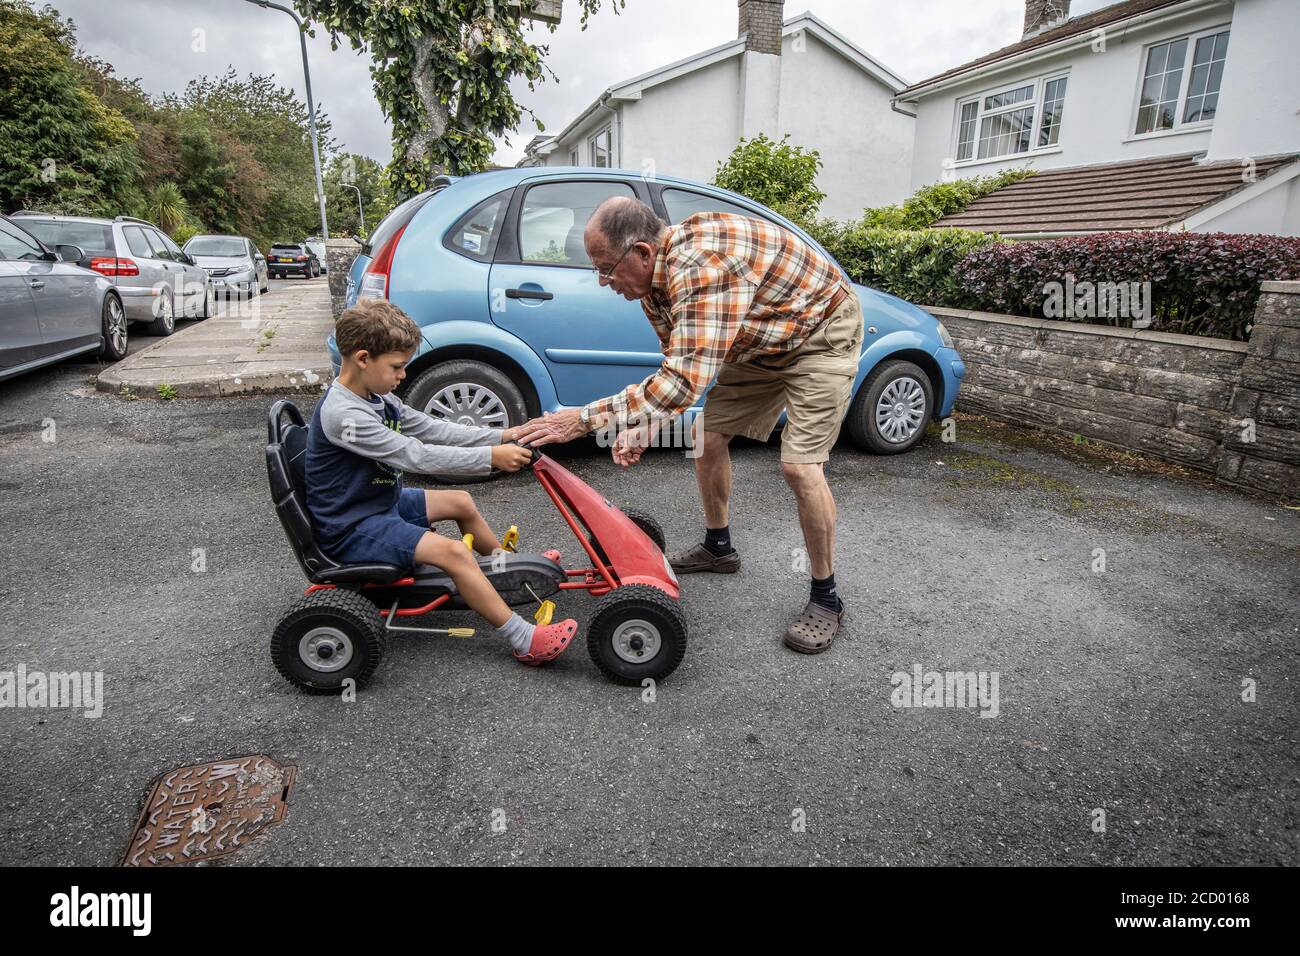 Grandfather at home enjoying the company of his 6 year old grandson, Wales, United Kingdom Stock Photo